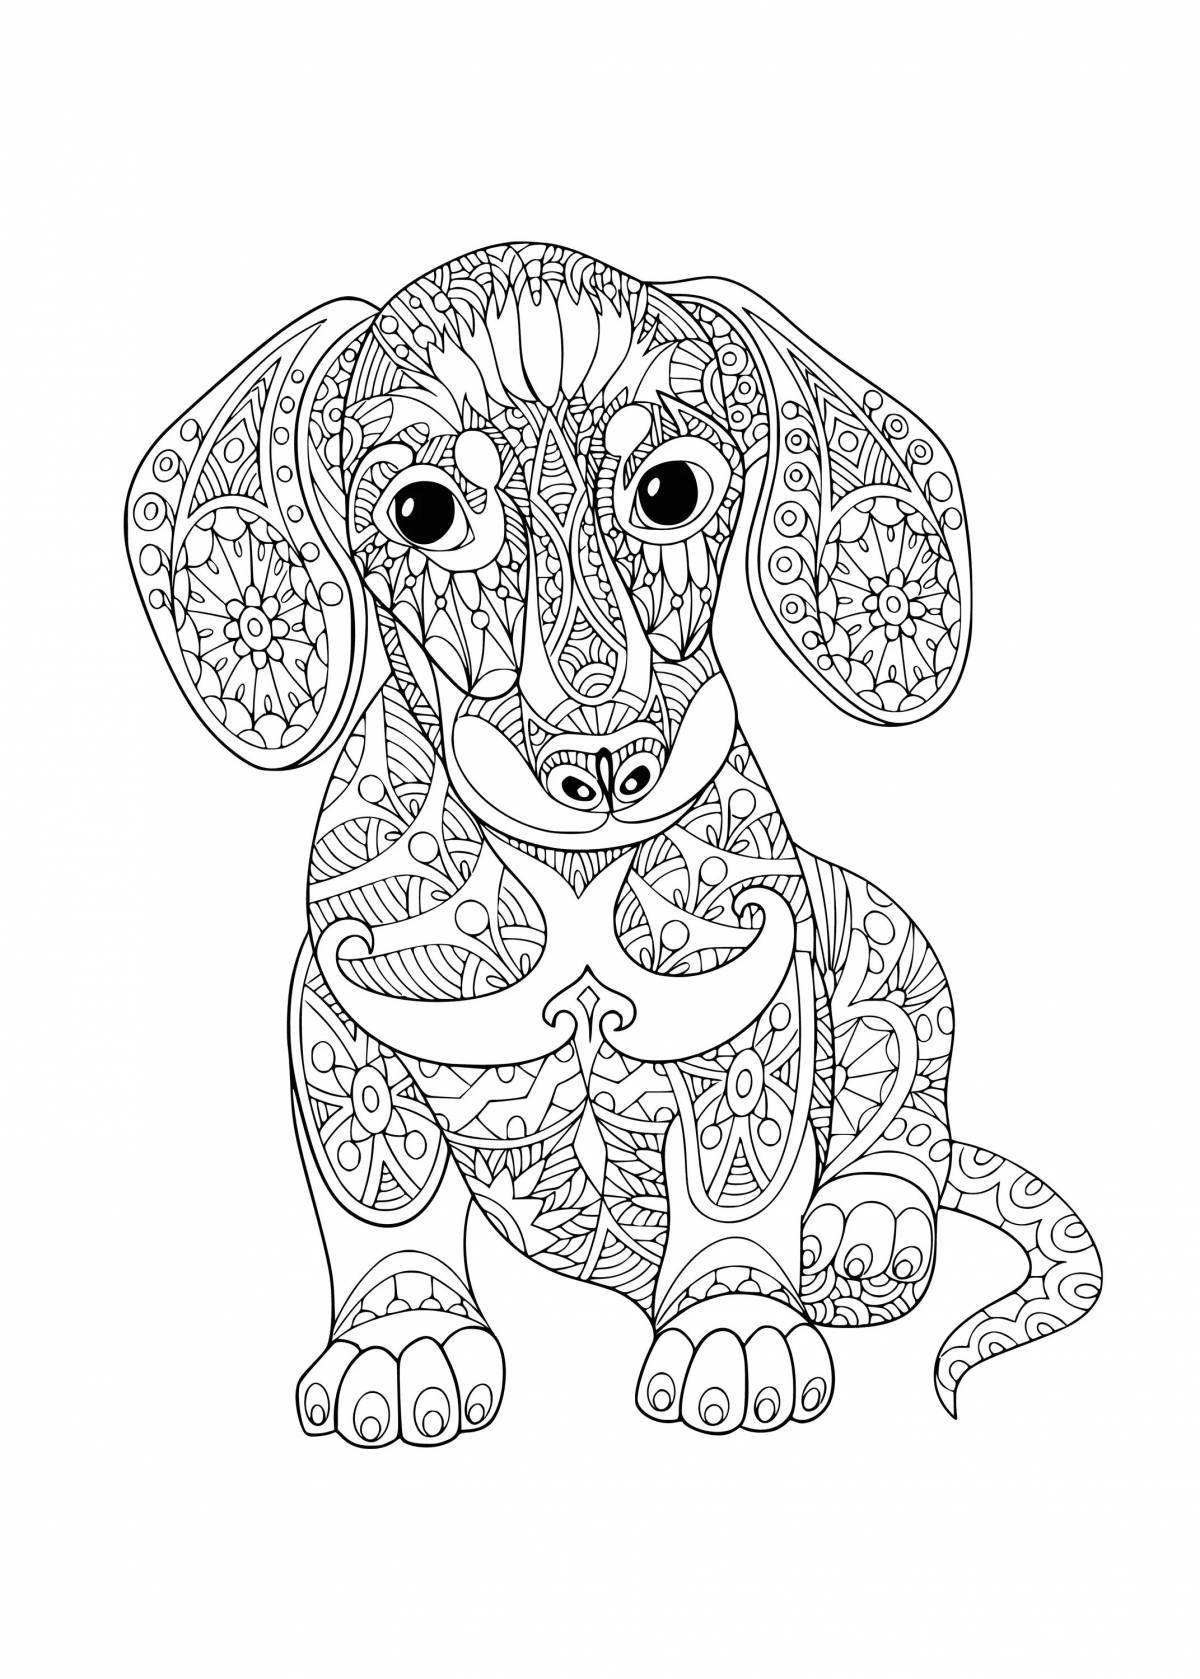 Fancy dachshund antistress coloring book